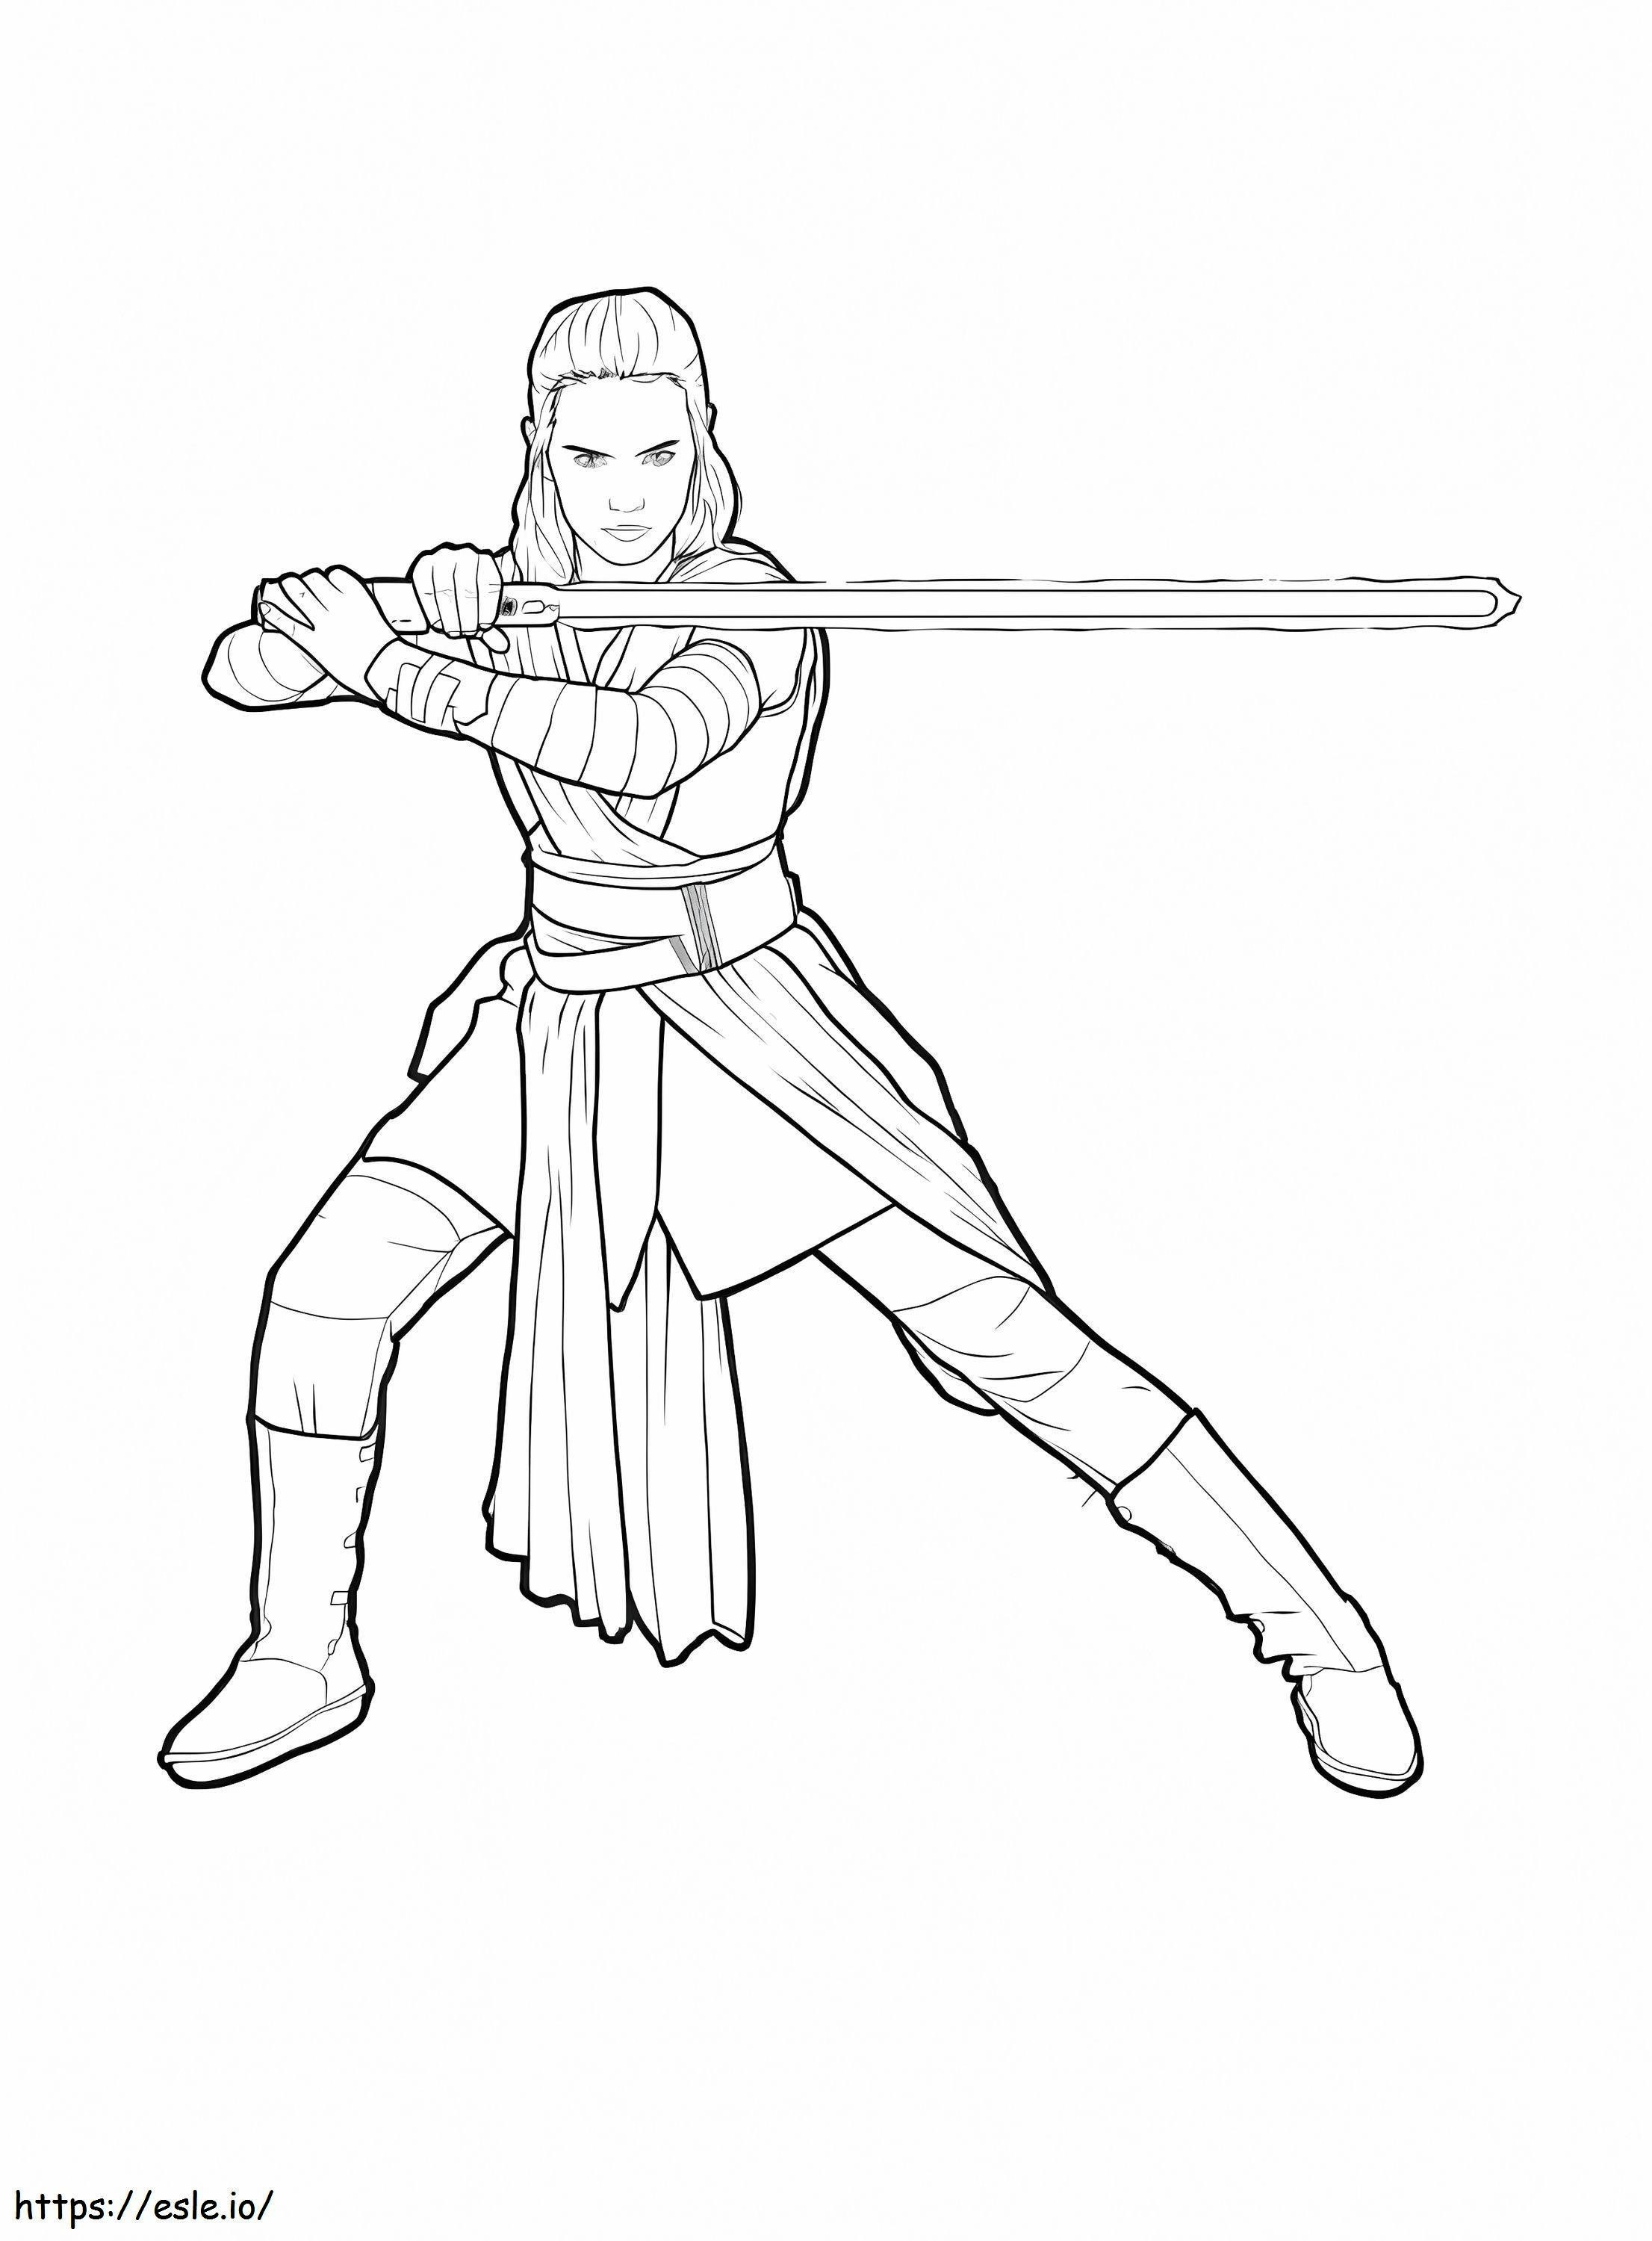 Rey With Lightsaber coloring page